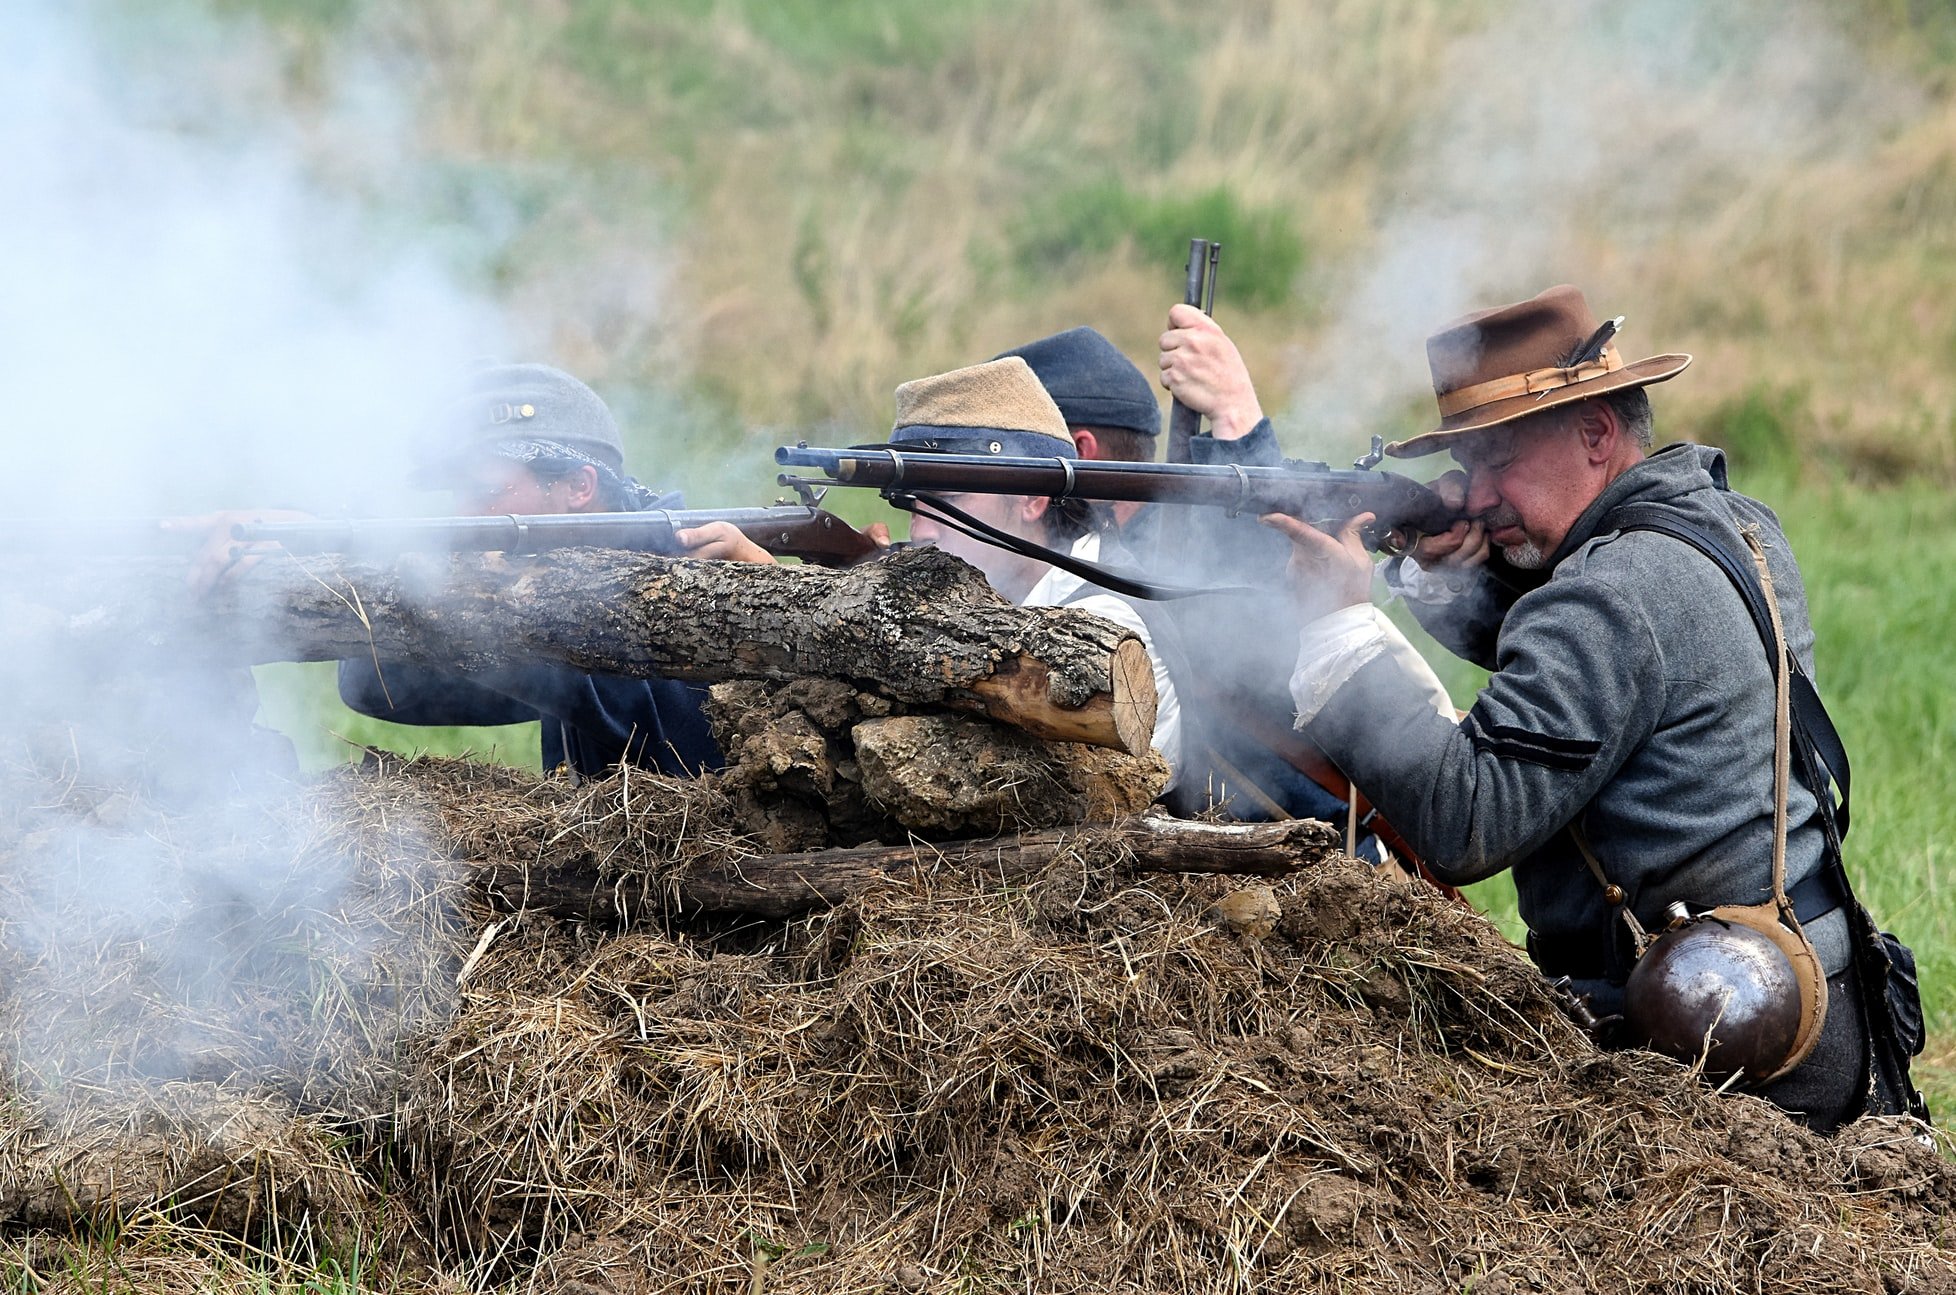 The American Battlefield Trust produced a virtual-reality YouTube series that puts viewers on the front lines of the American Civil War. Photo by Chris Chow, courtesy of Unsplash.